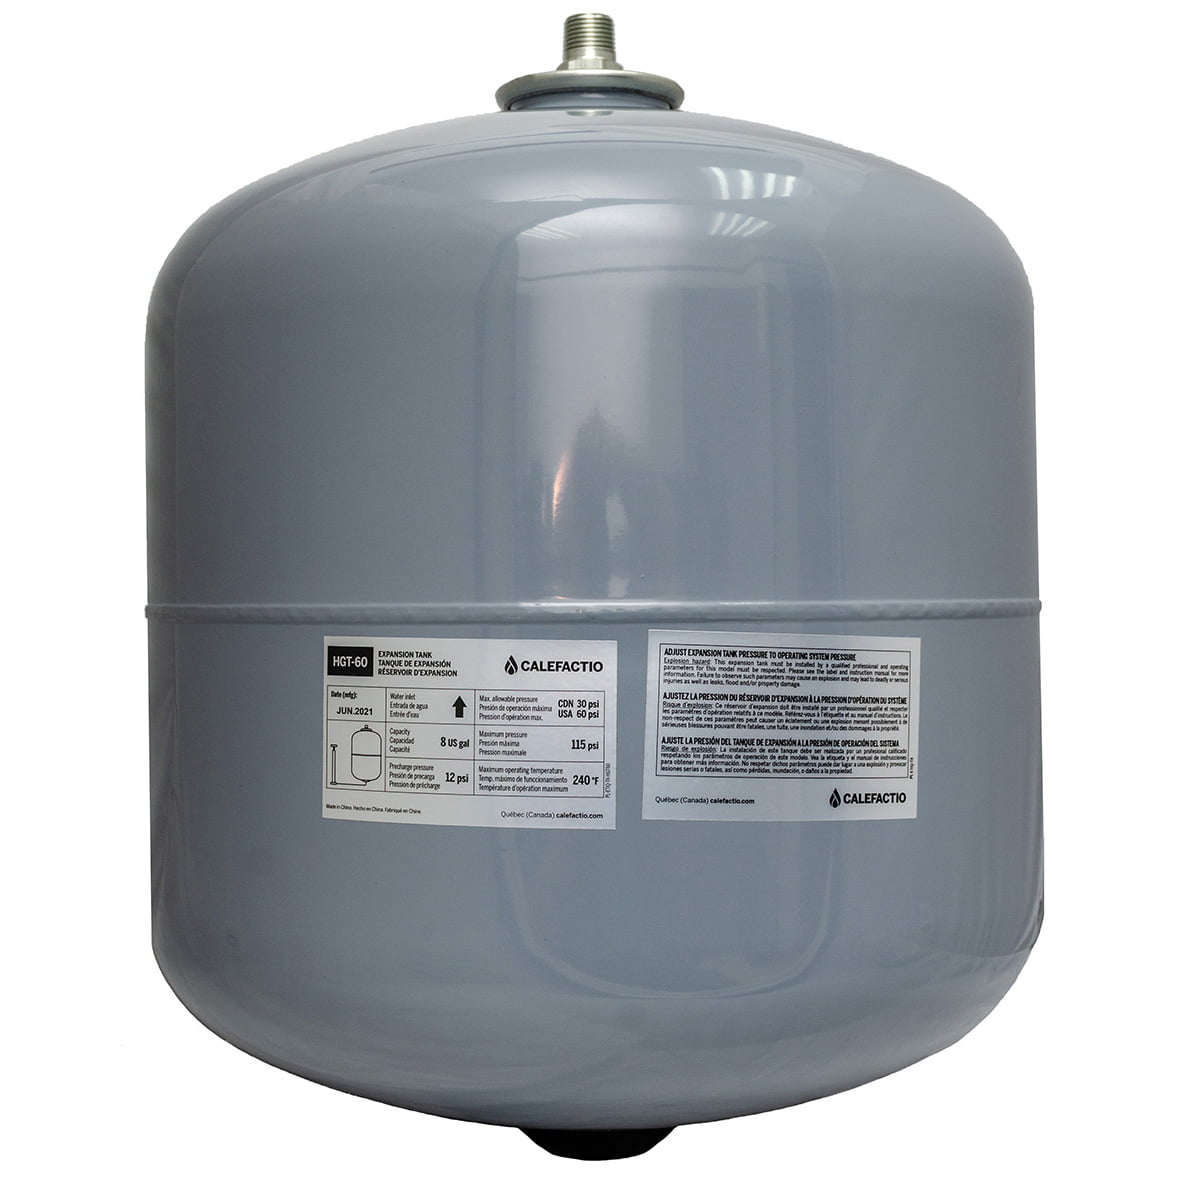 Calefactio HGT-60 expansion tank for non-potable water heating system